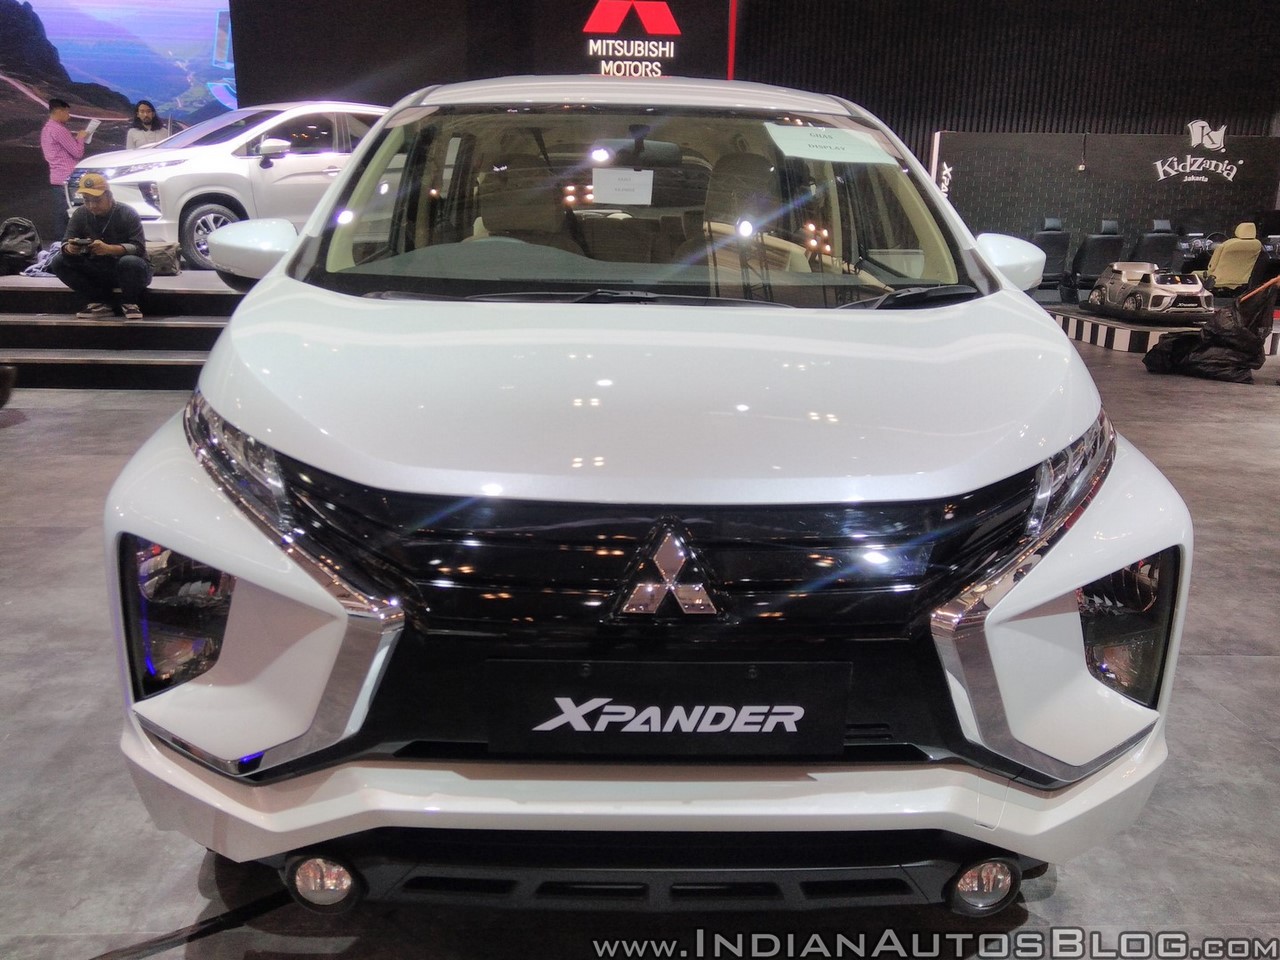 Mitsubishi Xpander could be sold in Bolivia and Egypt